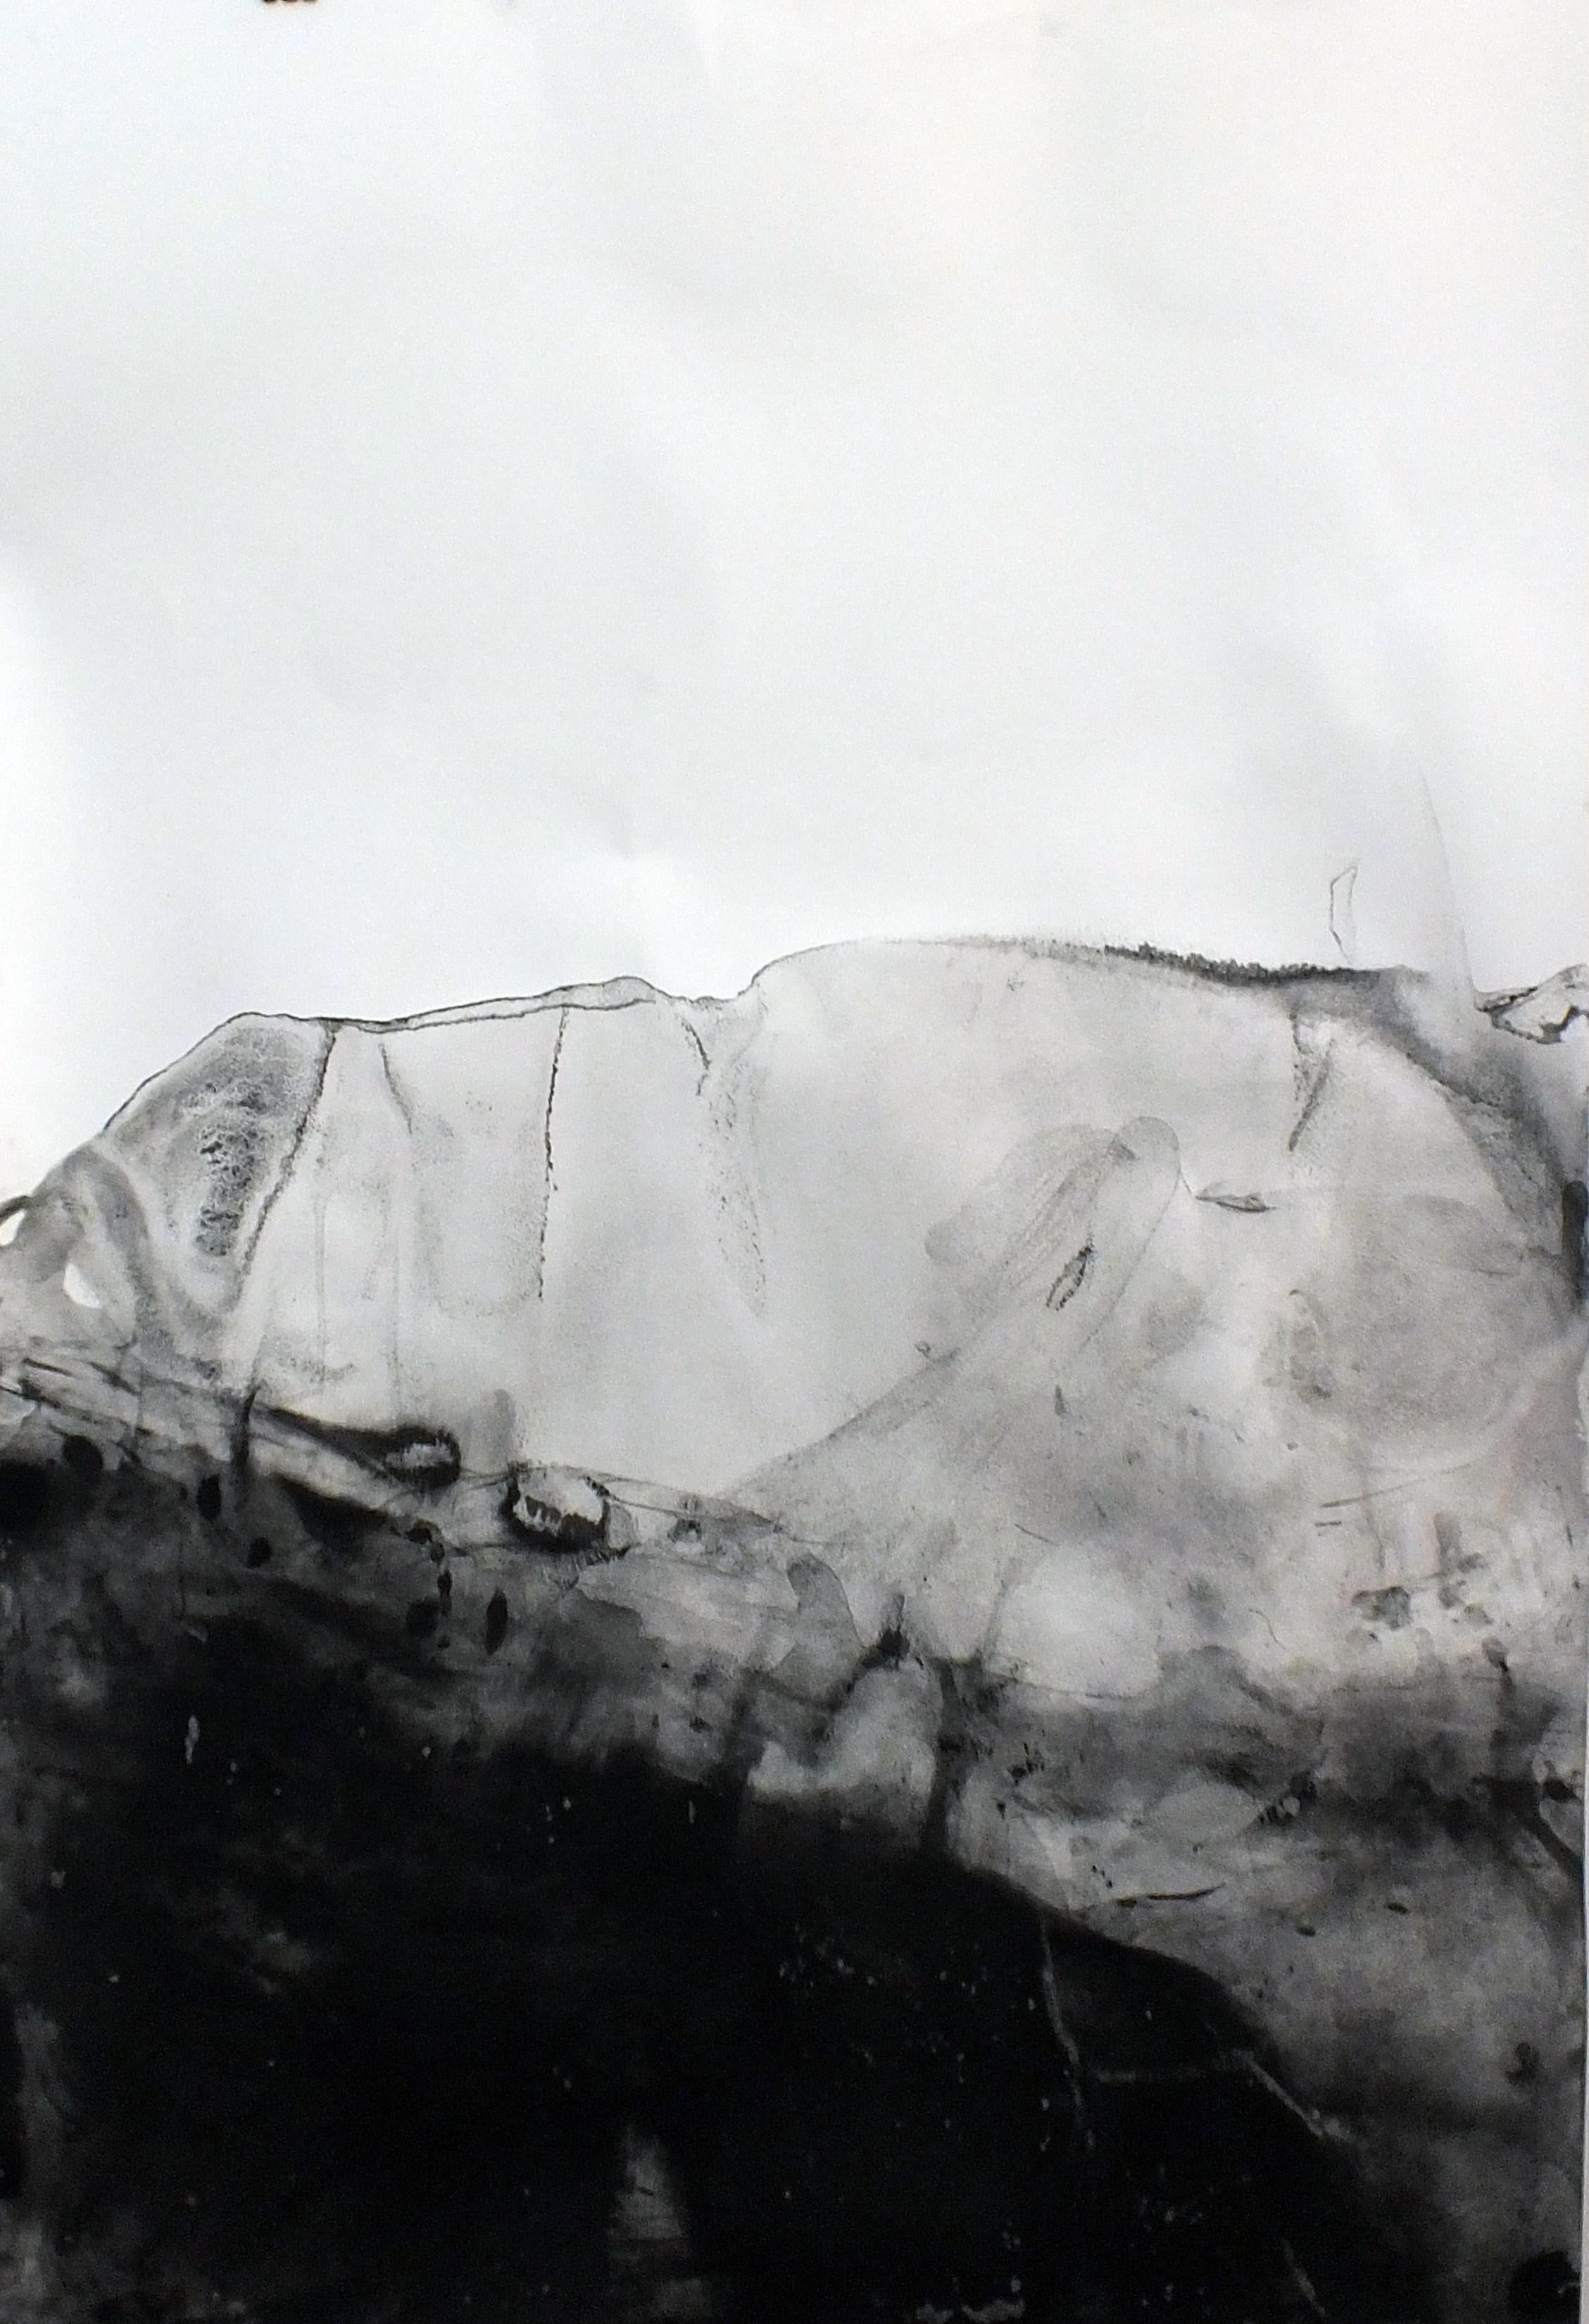 Landscape
Black ad white abstract drawing 
mineral oxide on paper ( Canson Montaval Paper 300 gr.)
large size  79x105
Frame Size 122 x91 cm
by Marilina Marchica 
signed with certificate of authenticity
Published in Catalog 